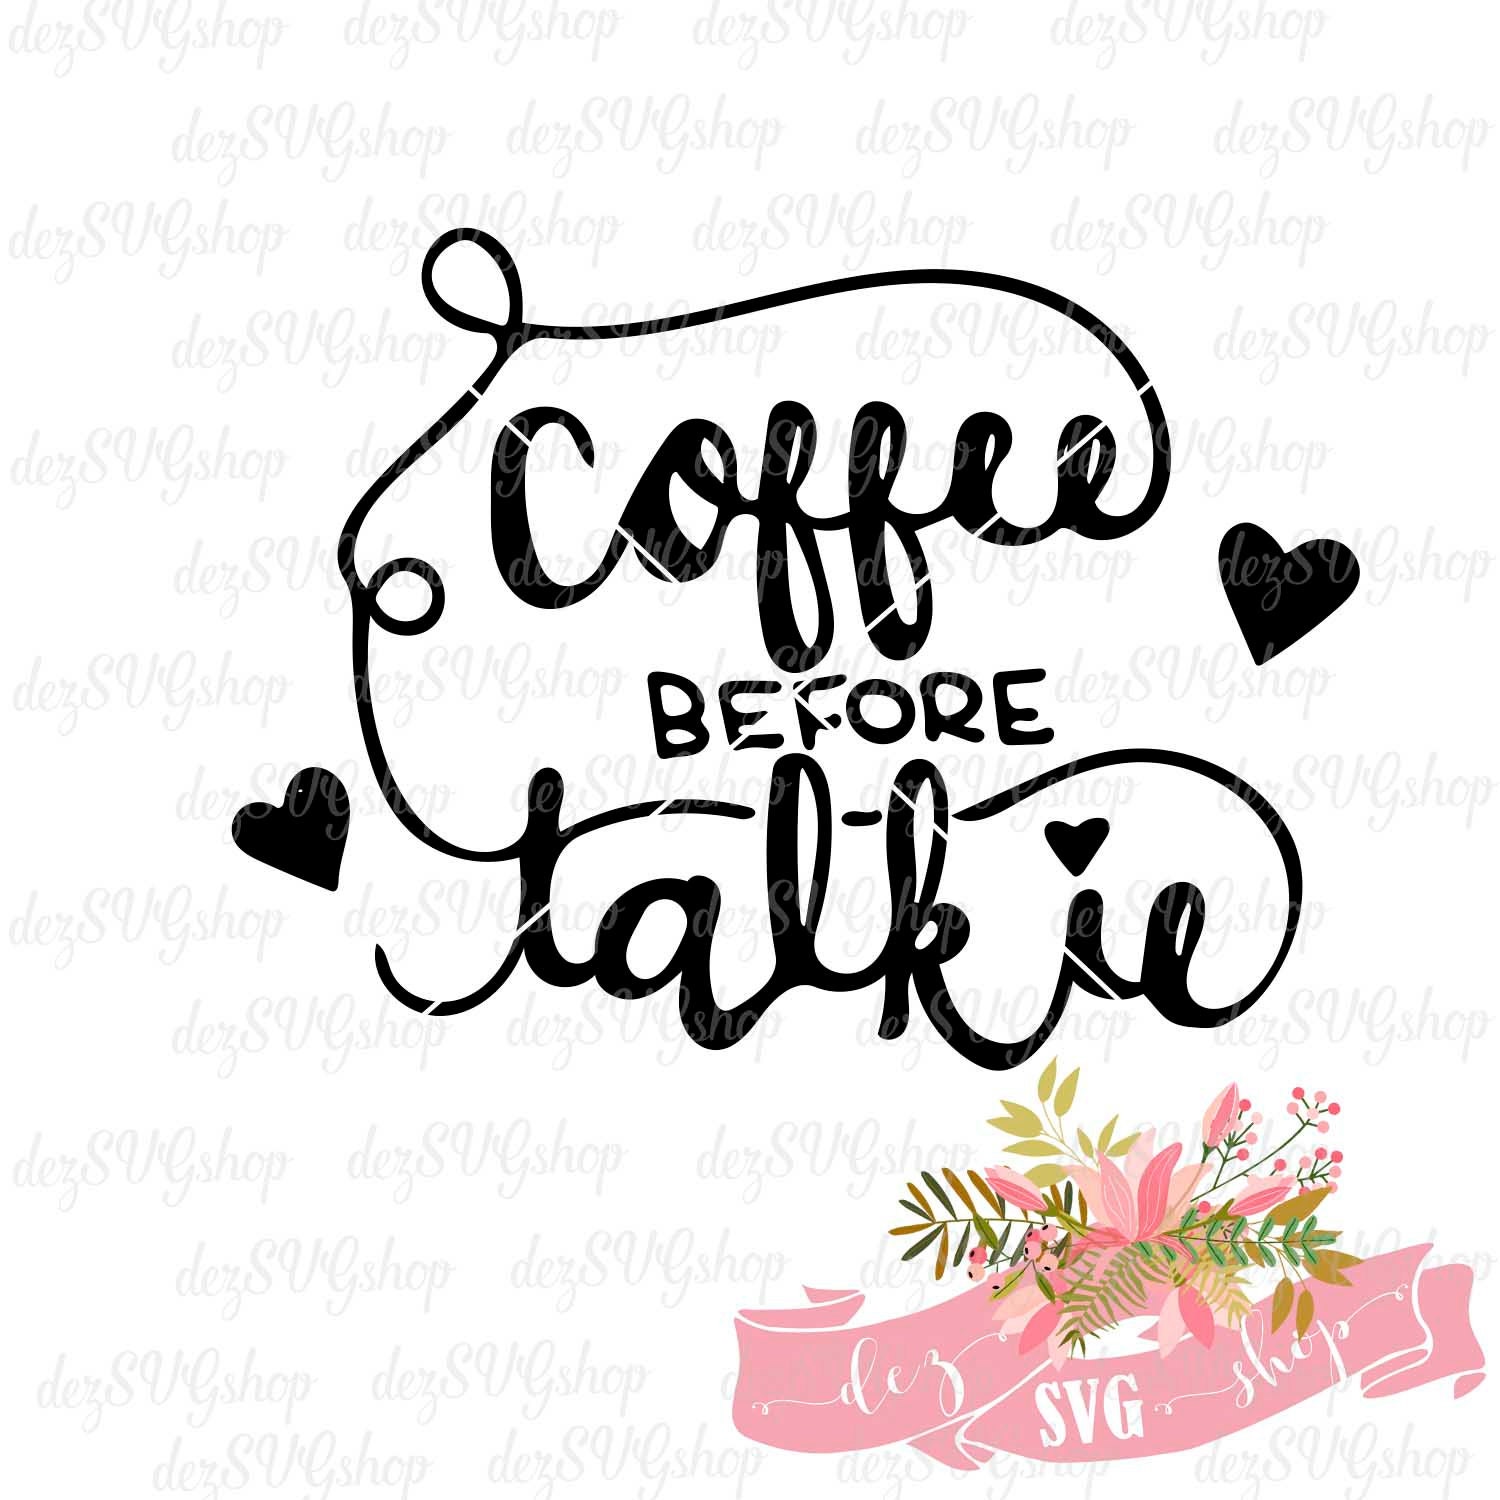 Download Coffee Before Talkie SVG file Cut File SVG & DXF files